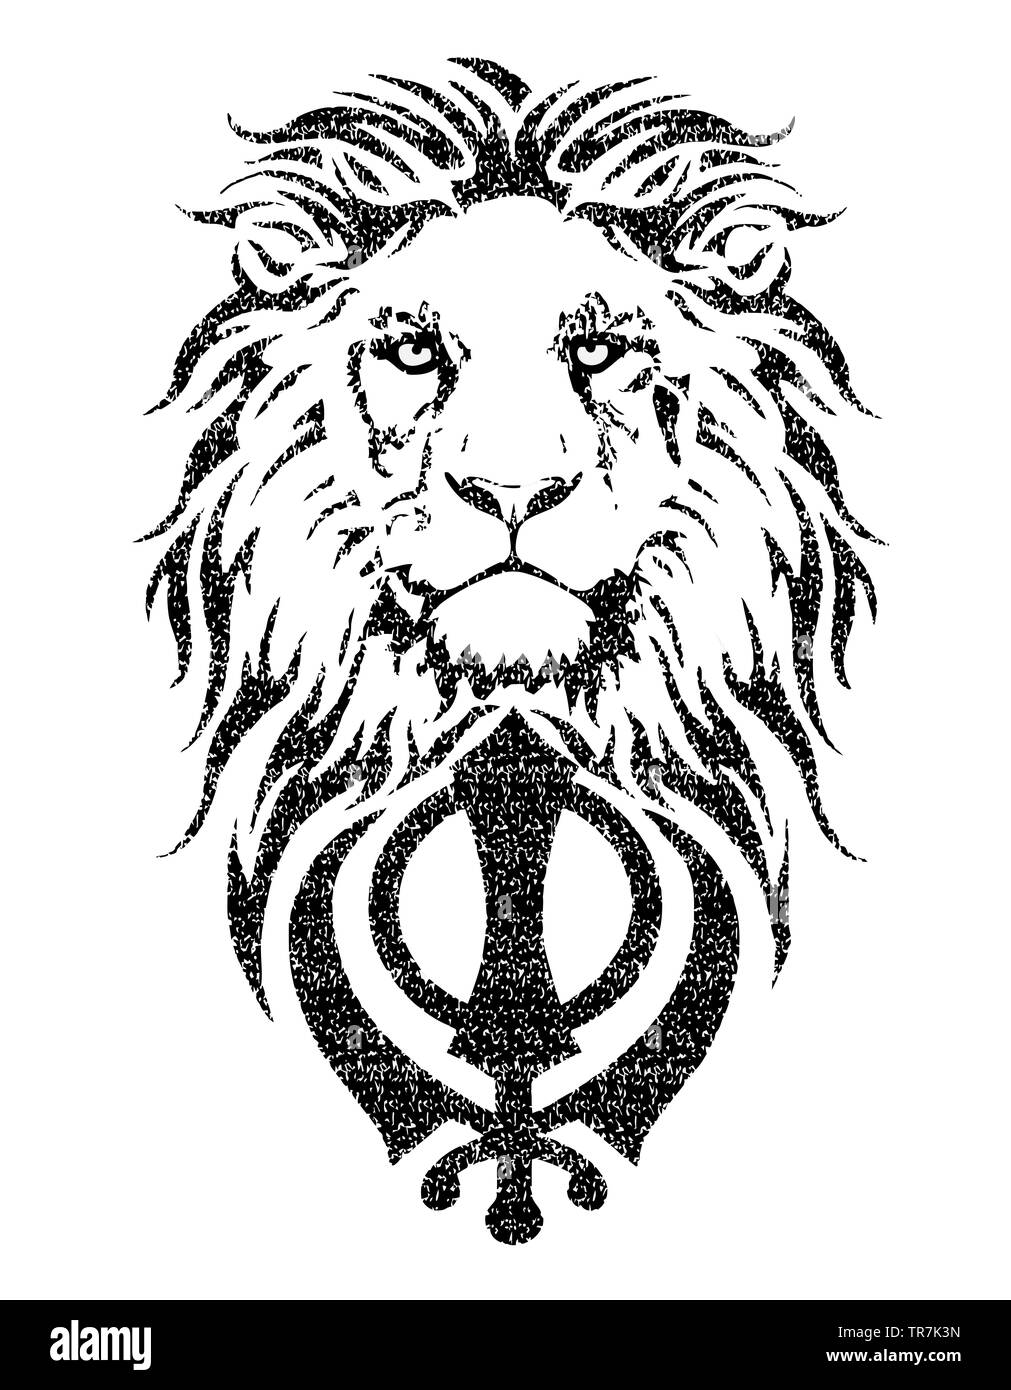 Khanda is the most significant symbol of Sikhism, decorated with a Lion with a long mane, on a white background, isolated, drawing for tattoo Stock Photo